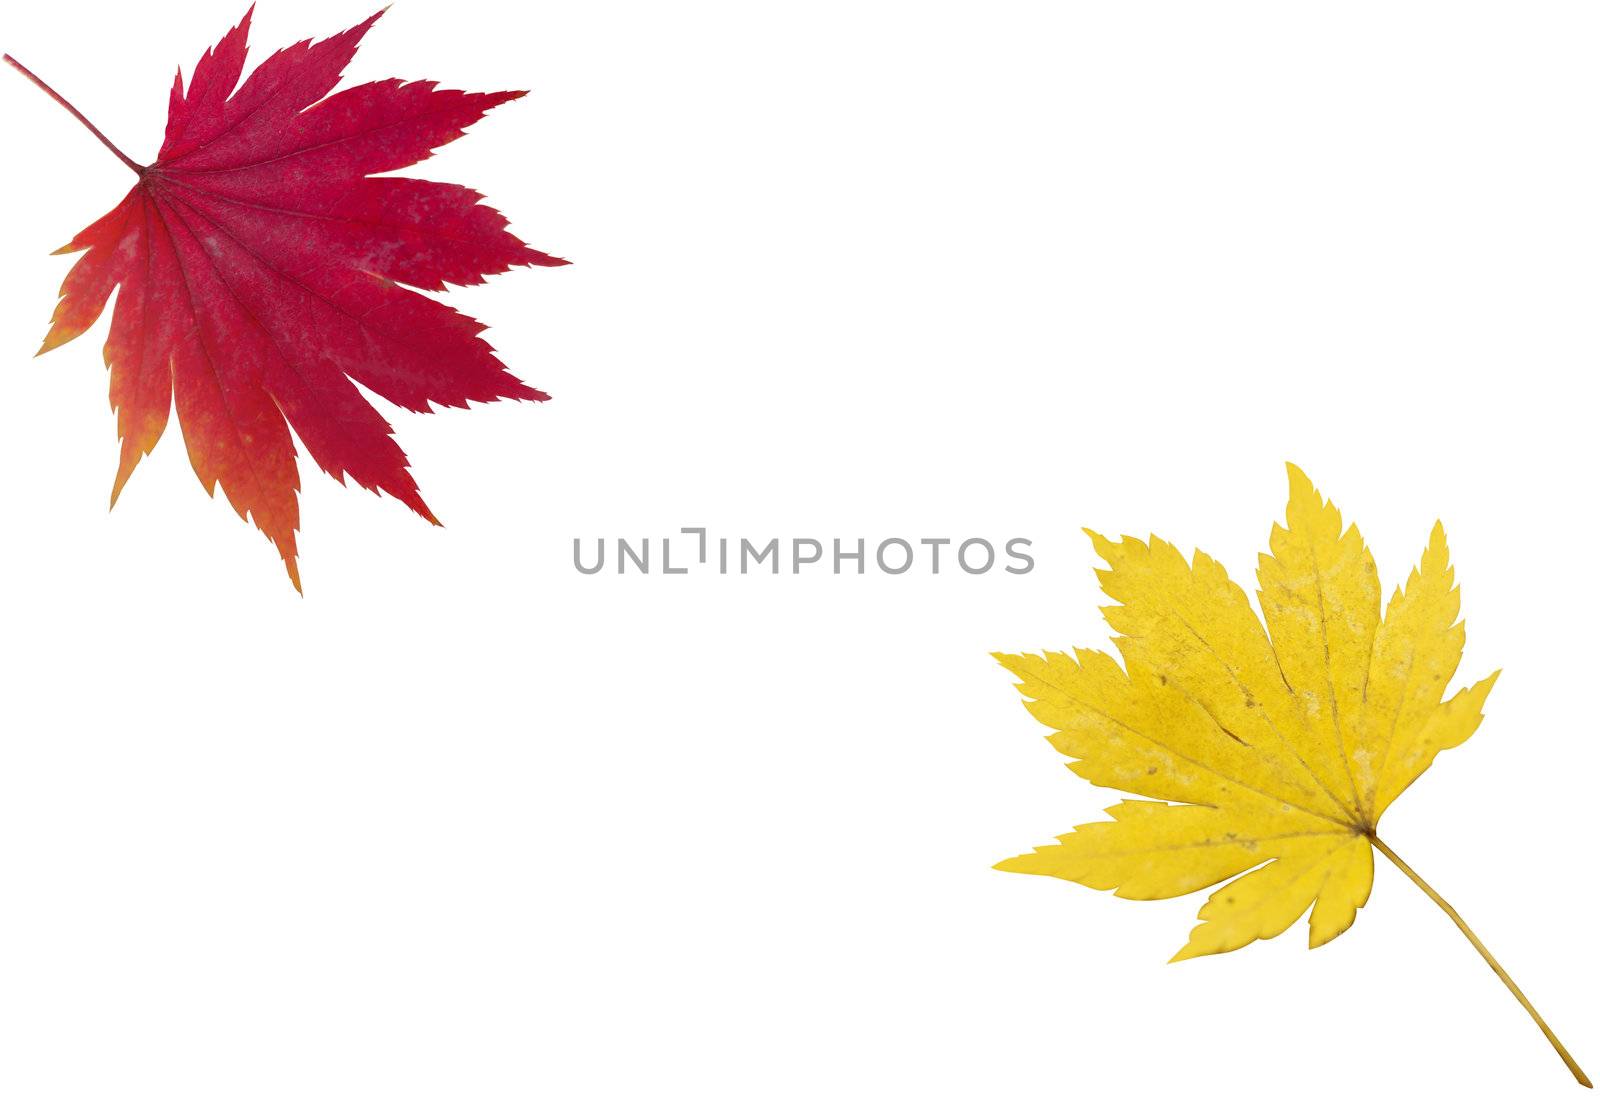 An image  with a red and yellow leaf